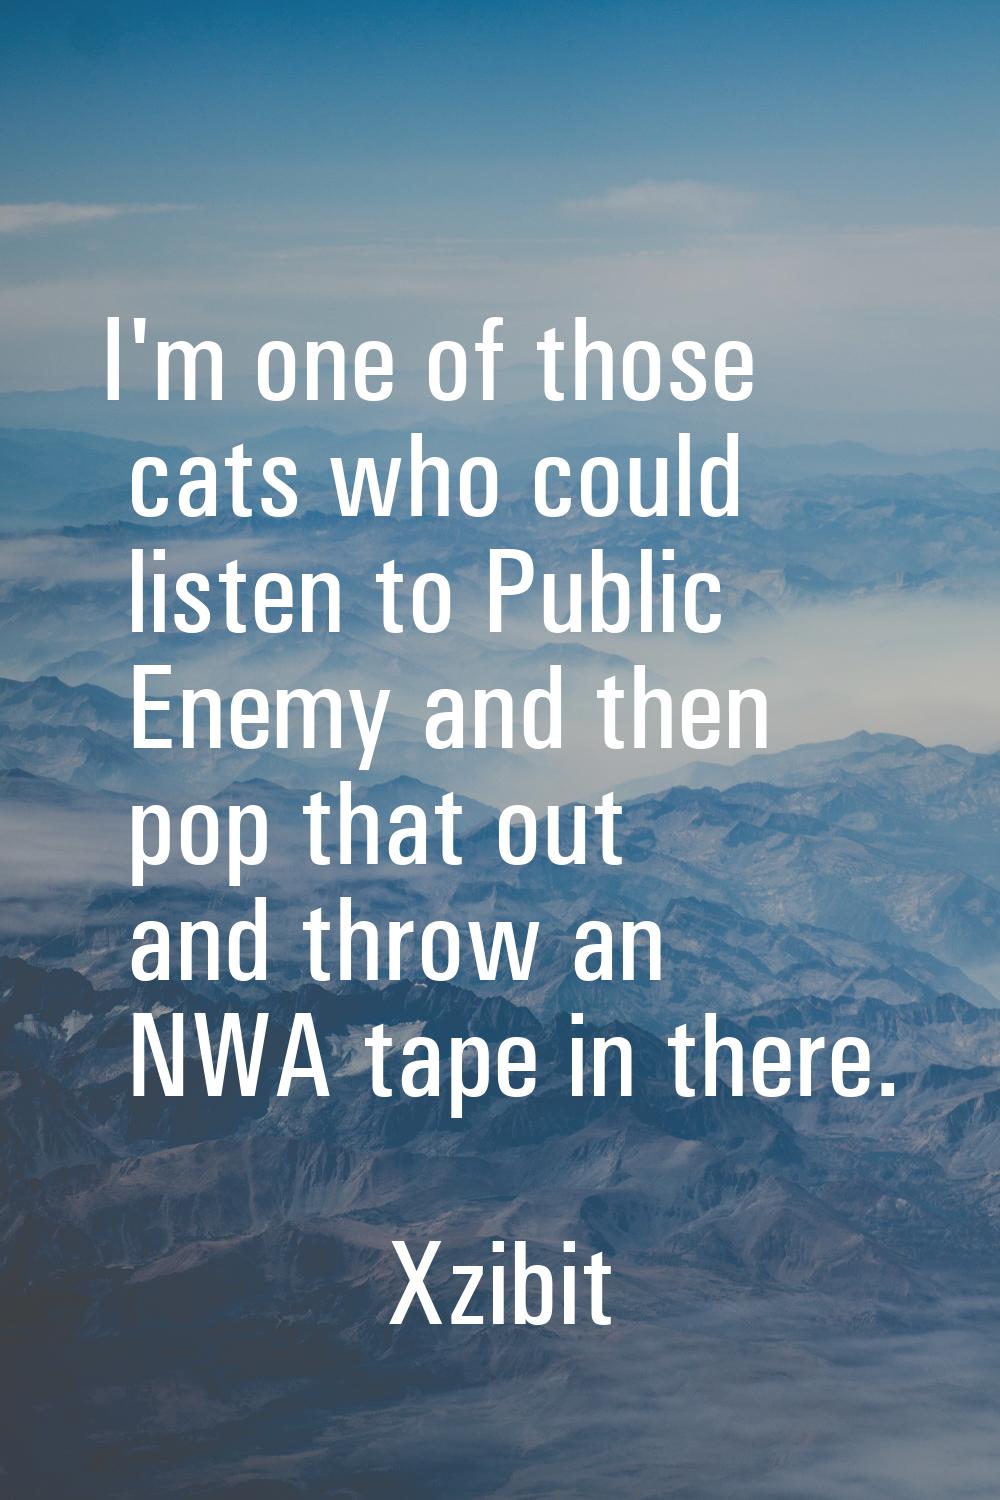 I'm one of those cats who could listen to Public Enemy and then pop that out and throw an NWA tape 